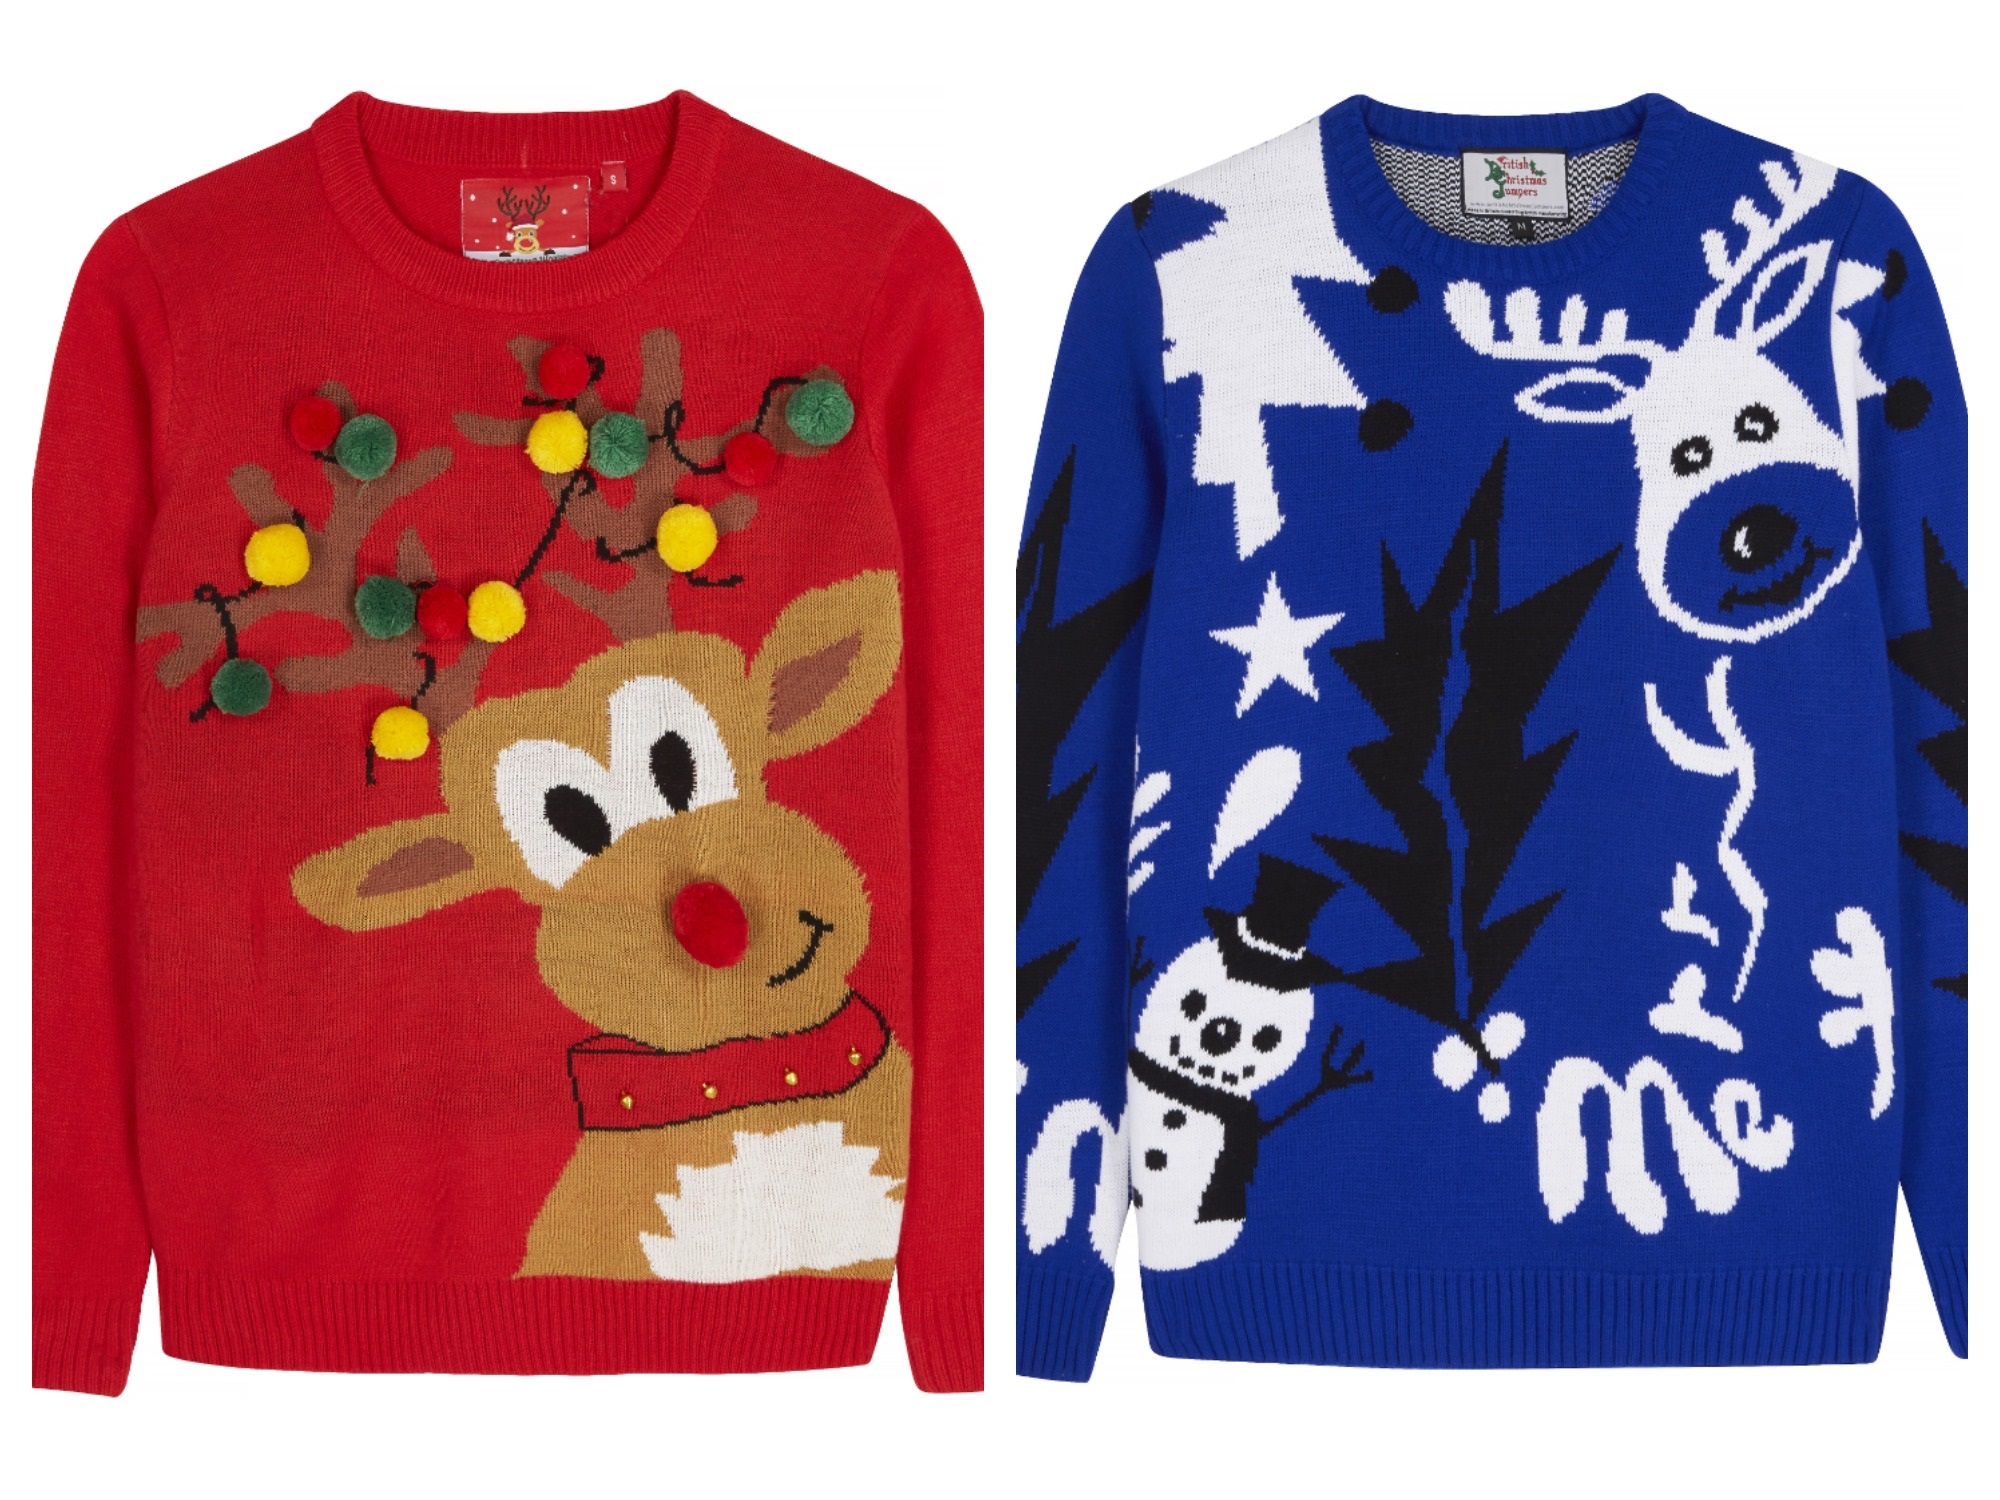 3. Join in on Christmas Jumper Day